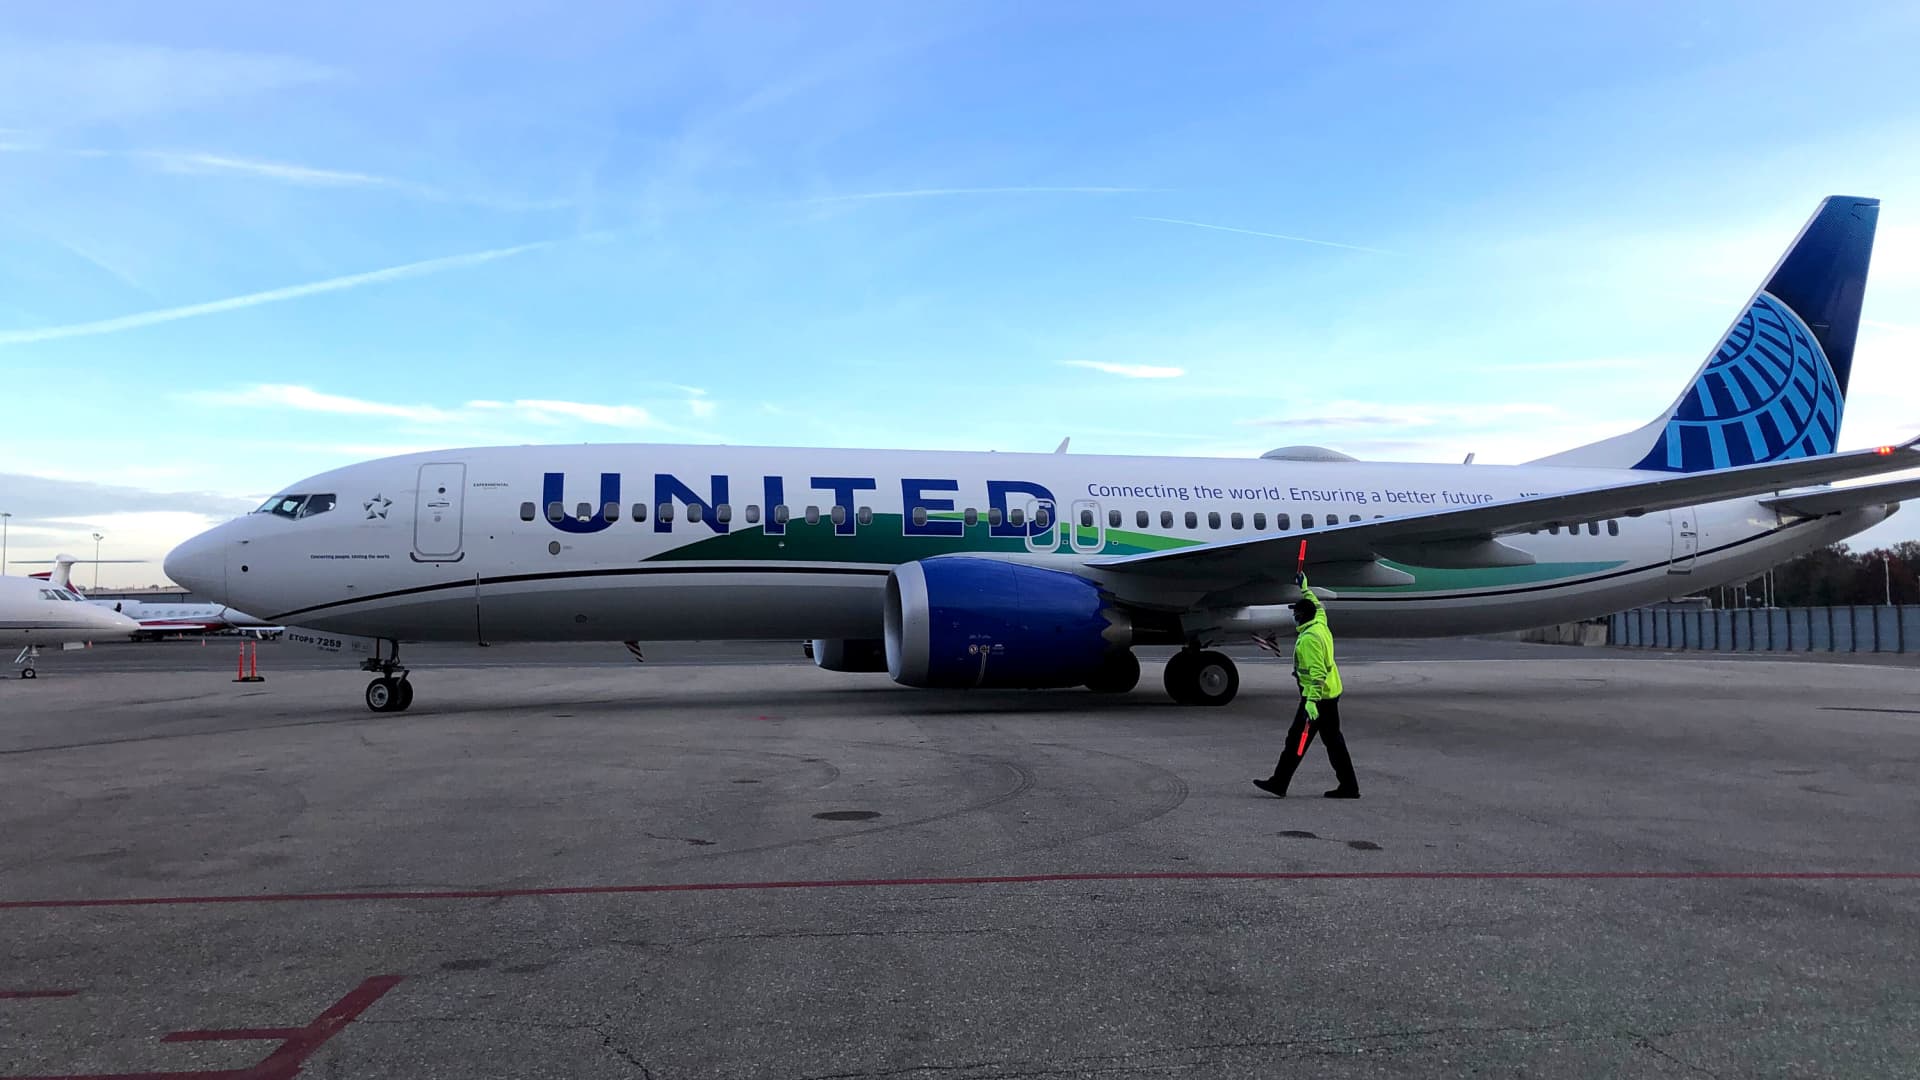 FAA clears United Airlines to add new aircraft and routes after safety review